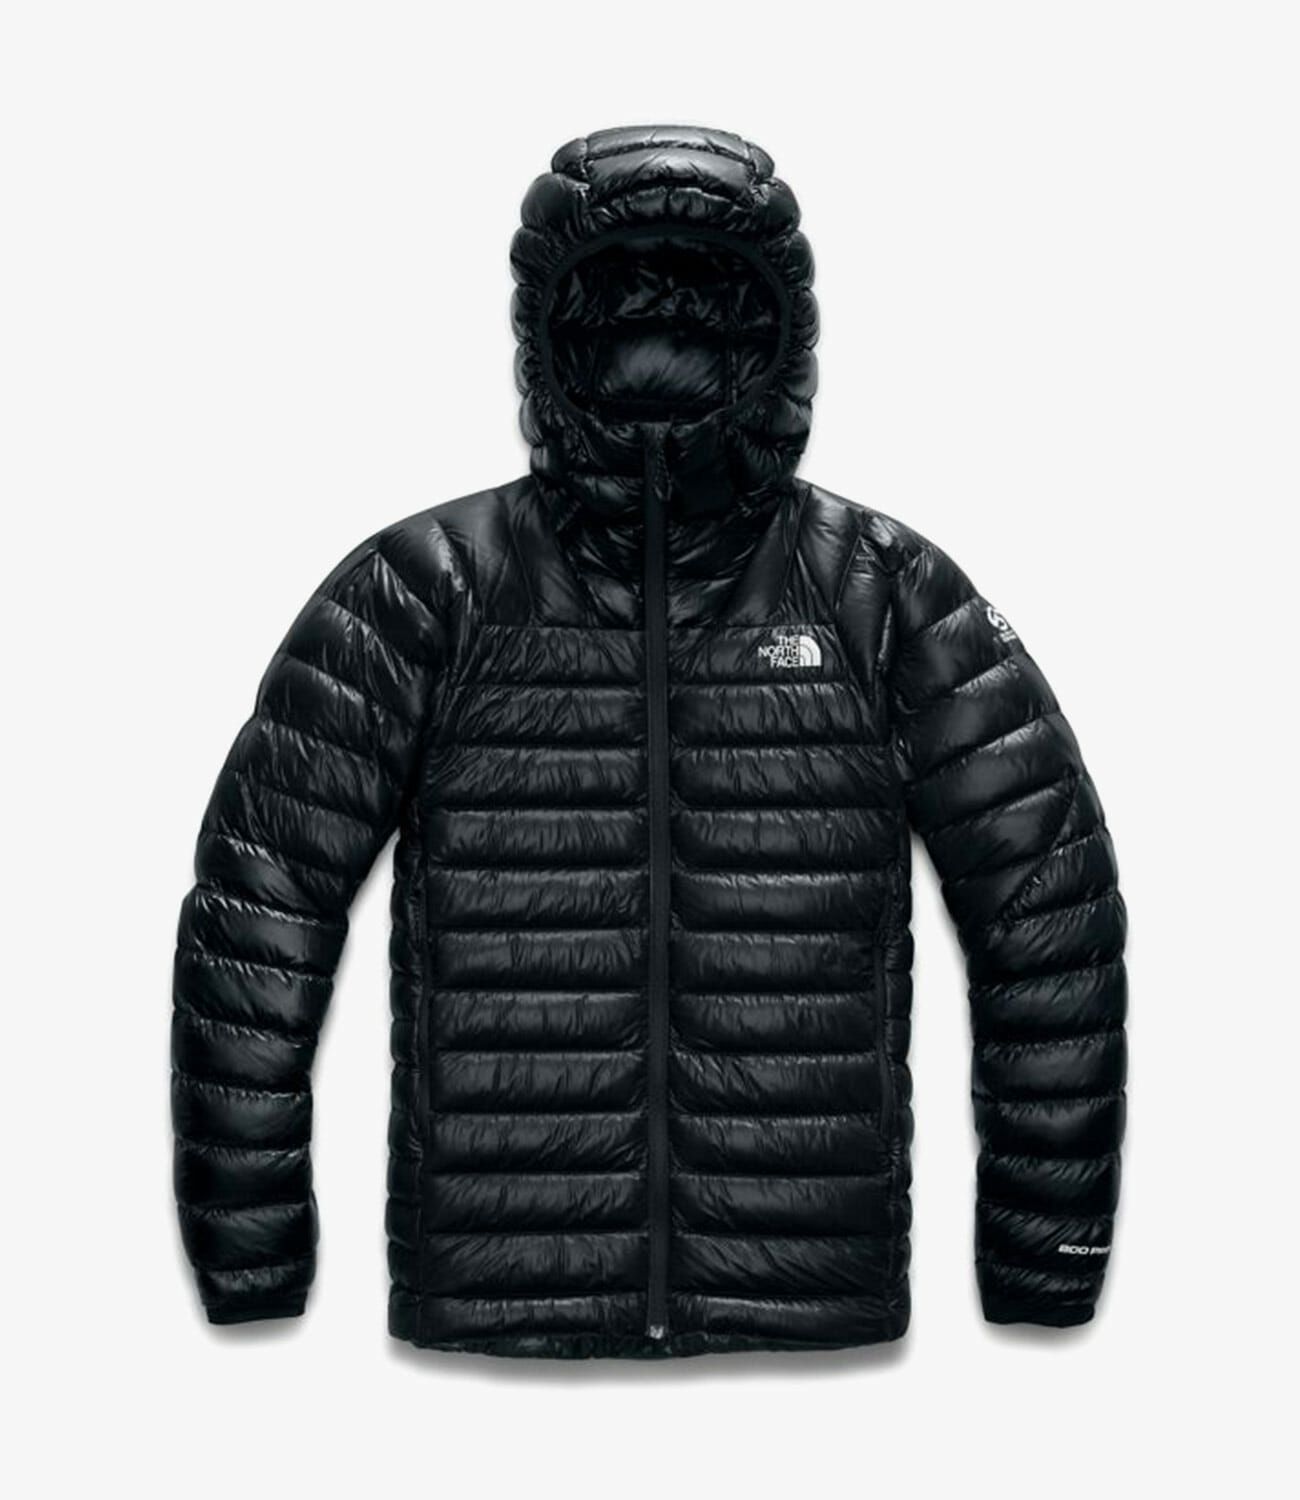 north face down jacket feathers coming out